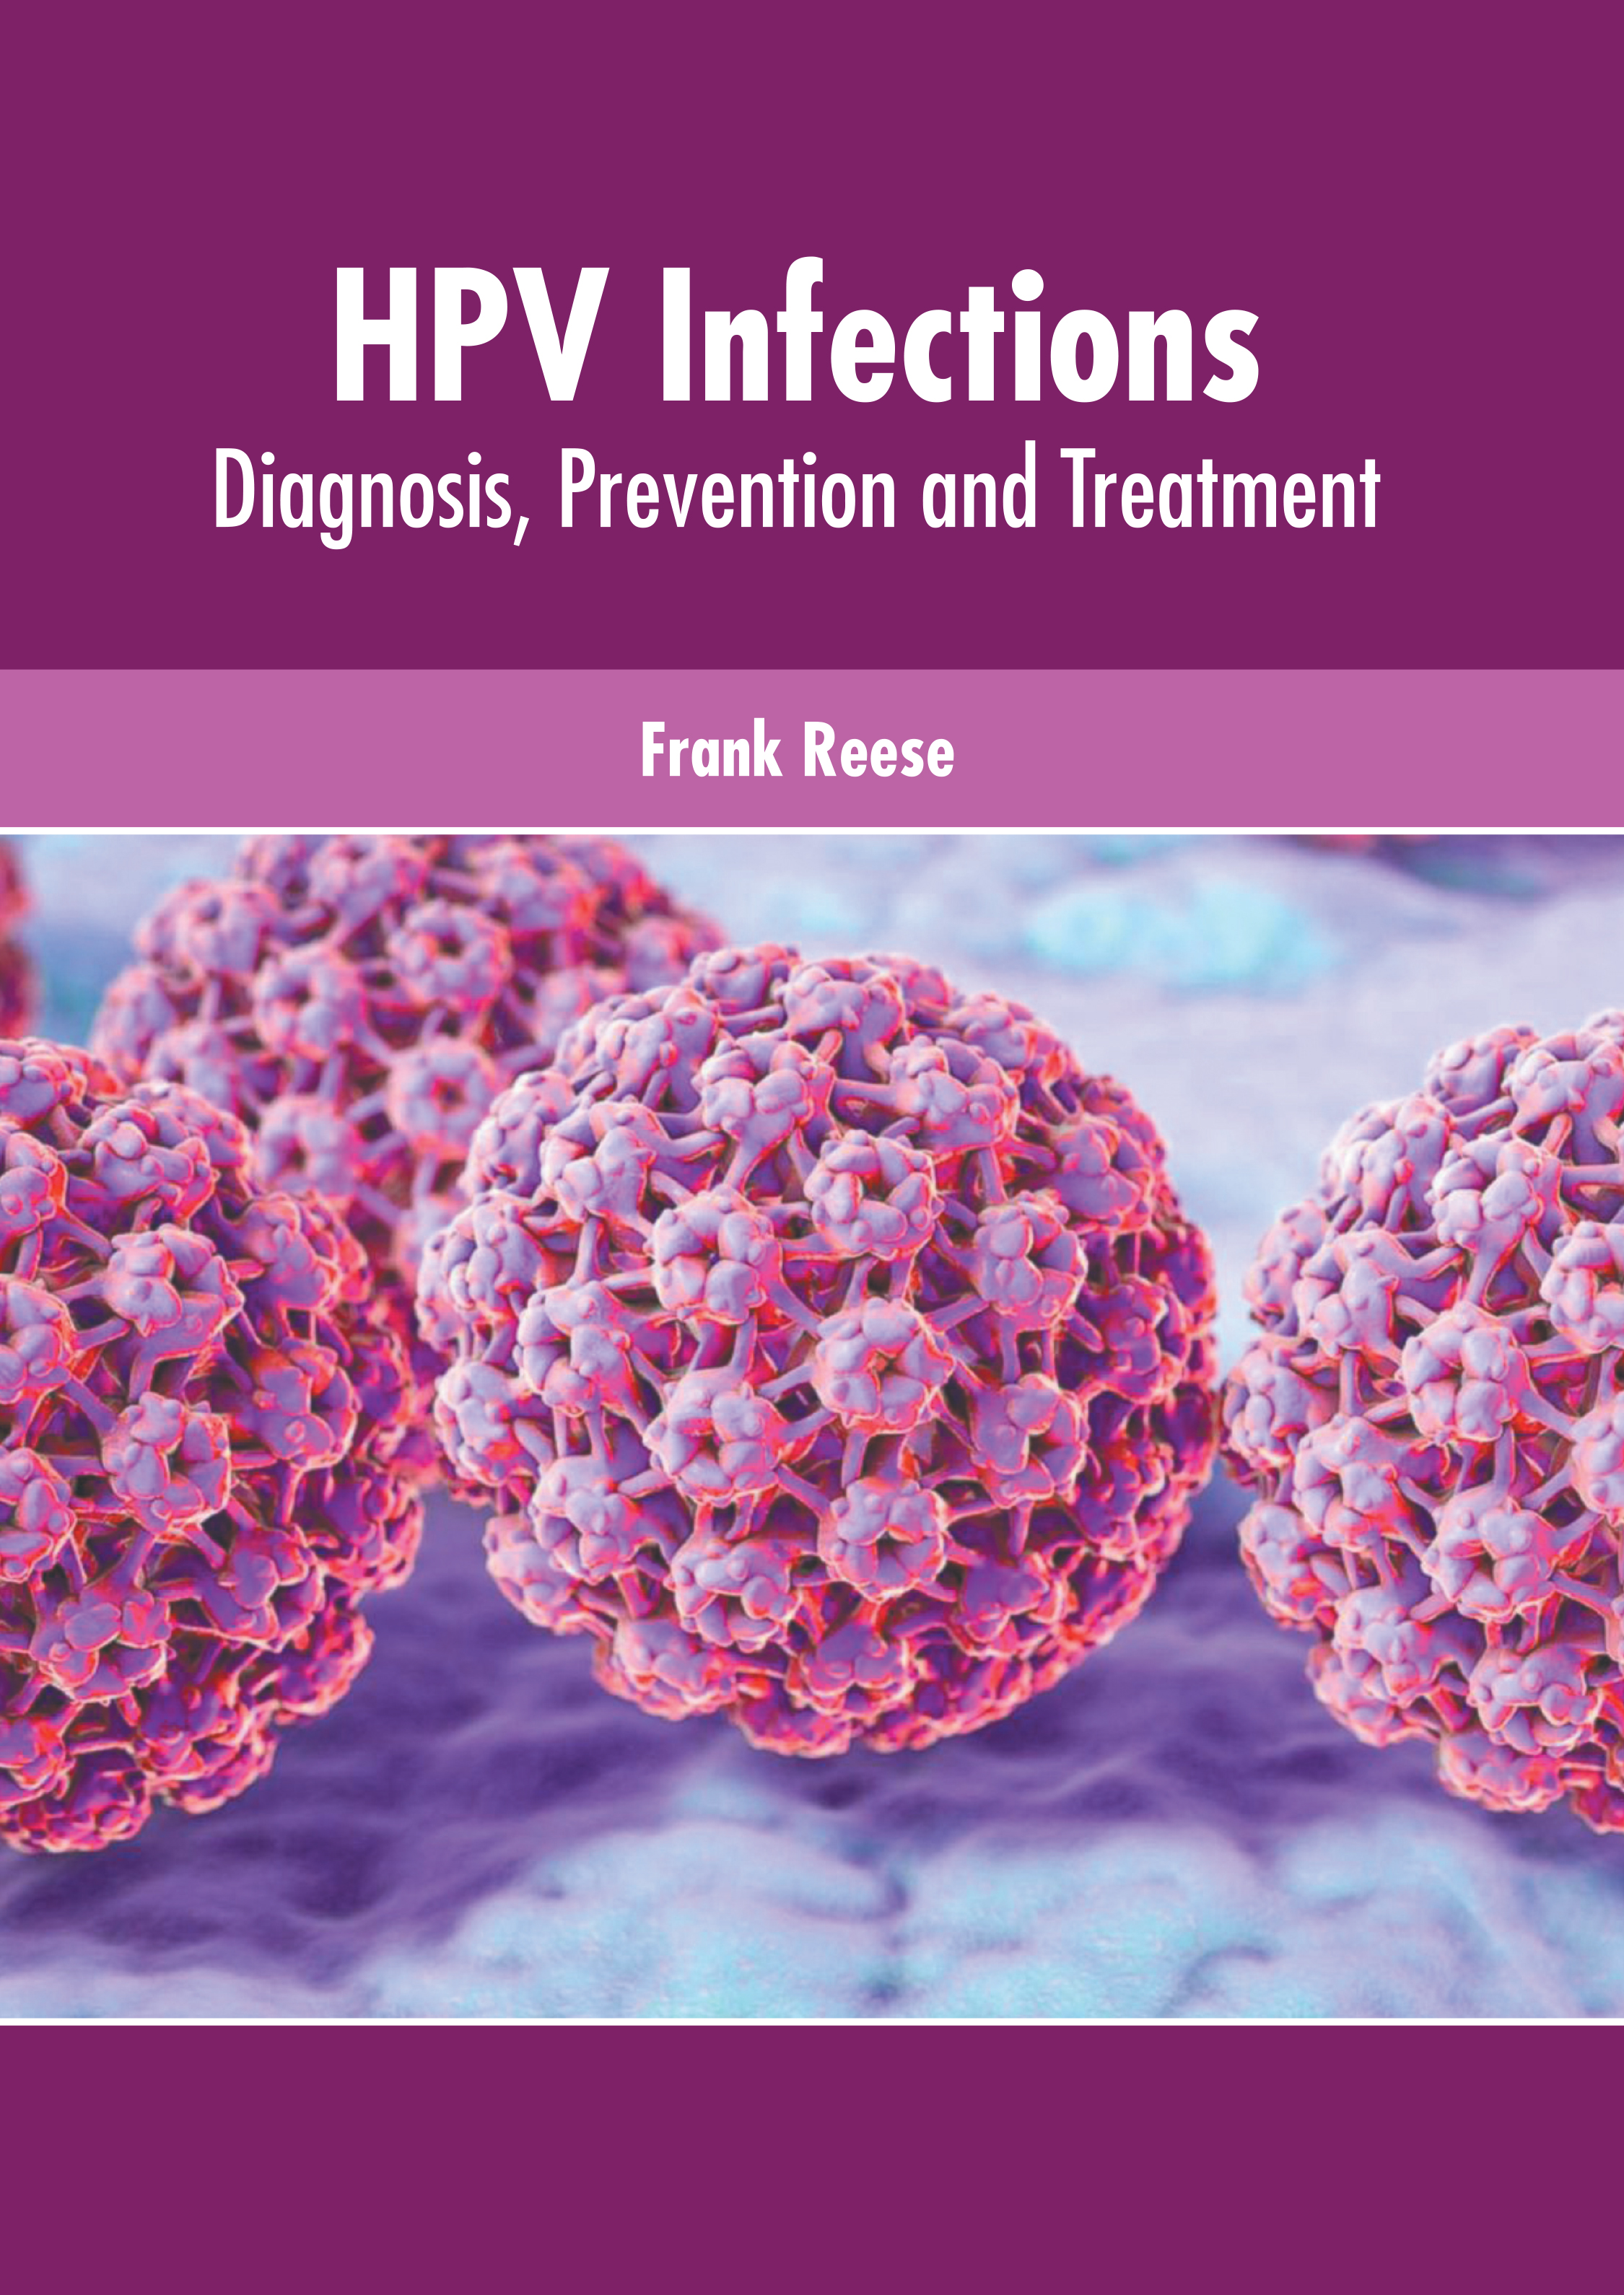 HPV INFECTIONS: DIAGNOSIS, PREVENTION AND TREATMENT | ISBN: 9781639272228